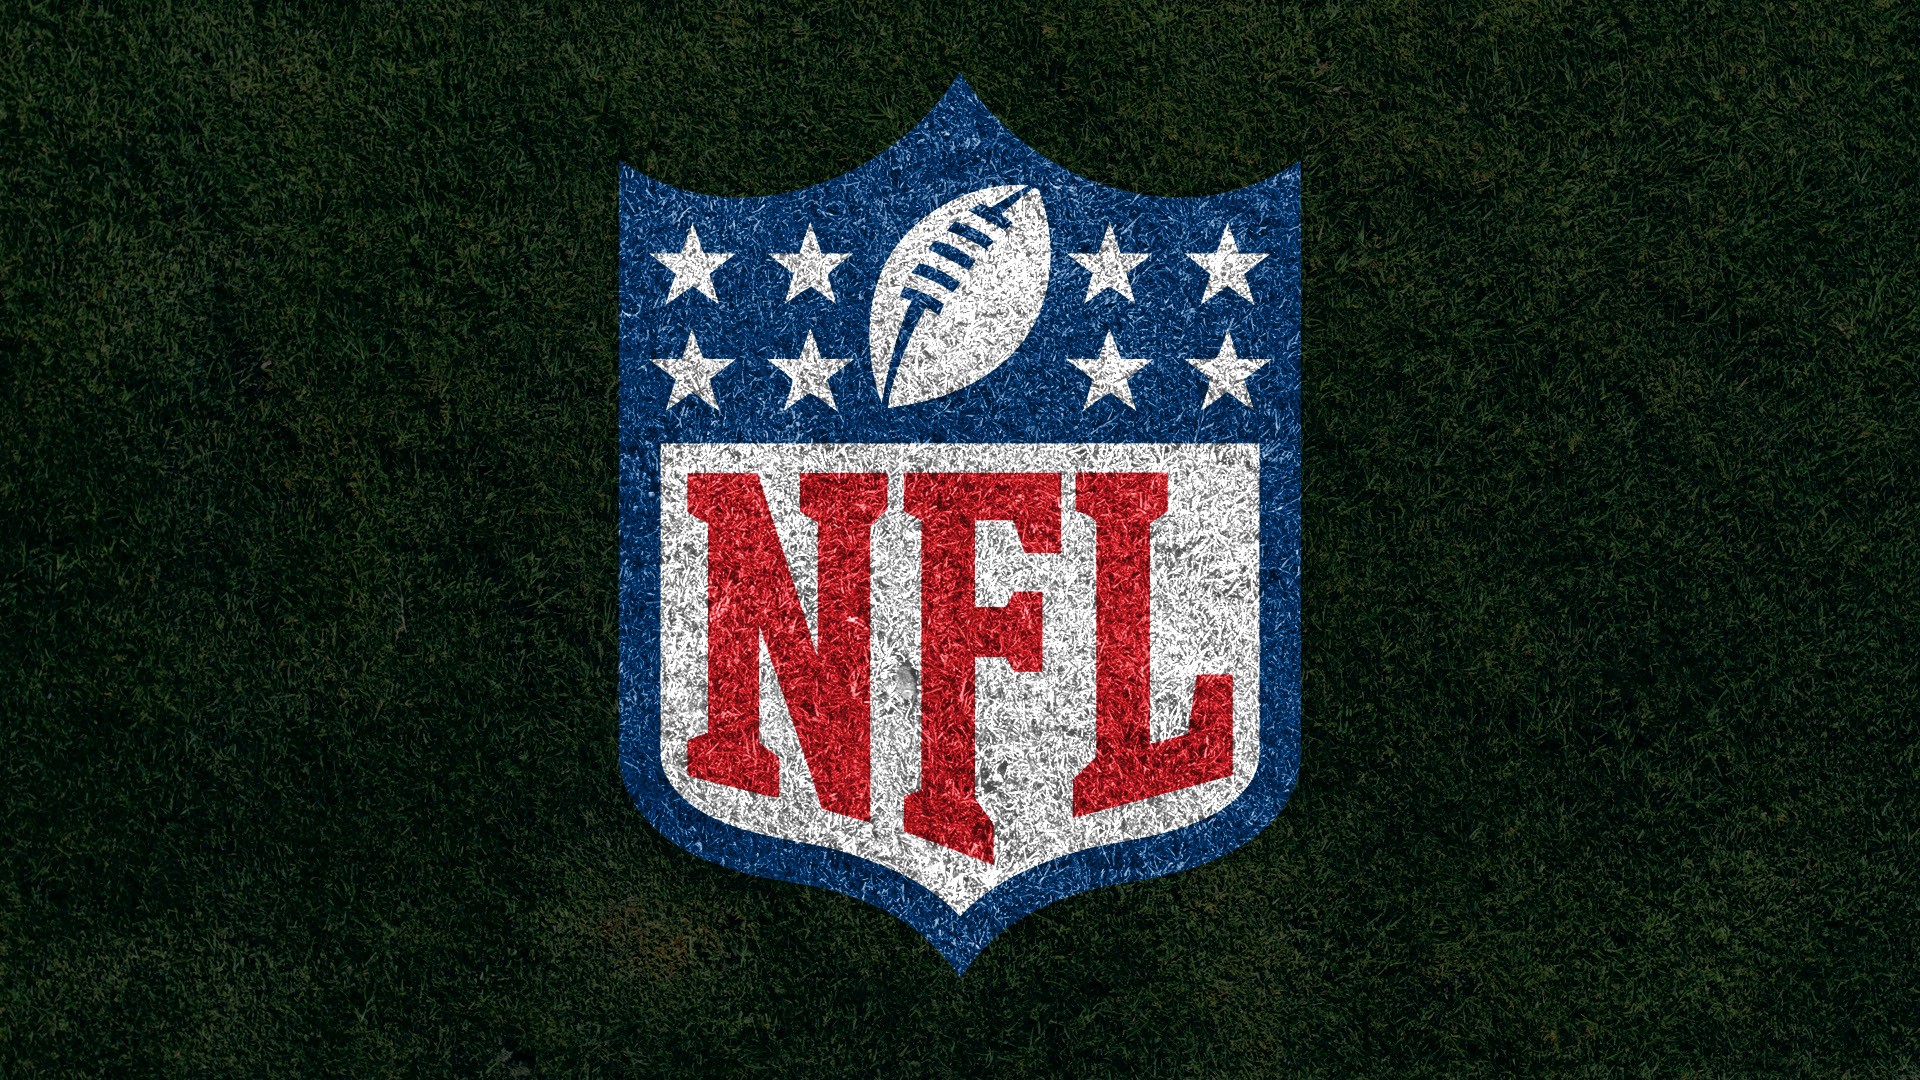 HD Desktop Wallpaper NFL Logo with high-resolution 1920x1080 pixel. You can use this wallpaper for your Mac or Windows Desktop Background, iPhone, Android or Tablet and another Smartphone device